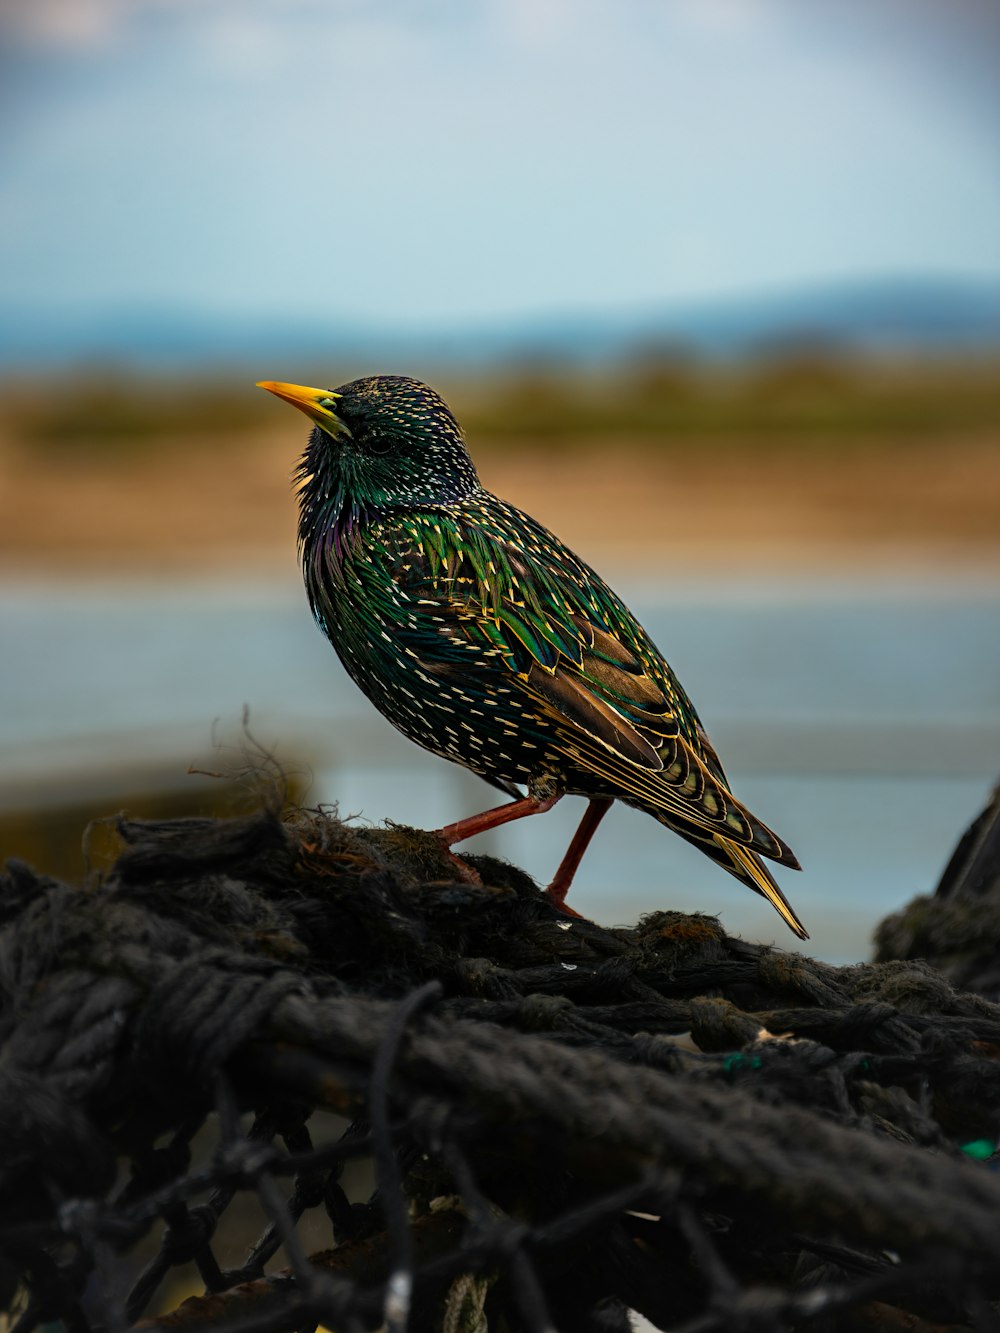 a colorful bird sitting on top of a pile of rope